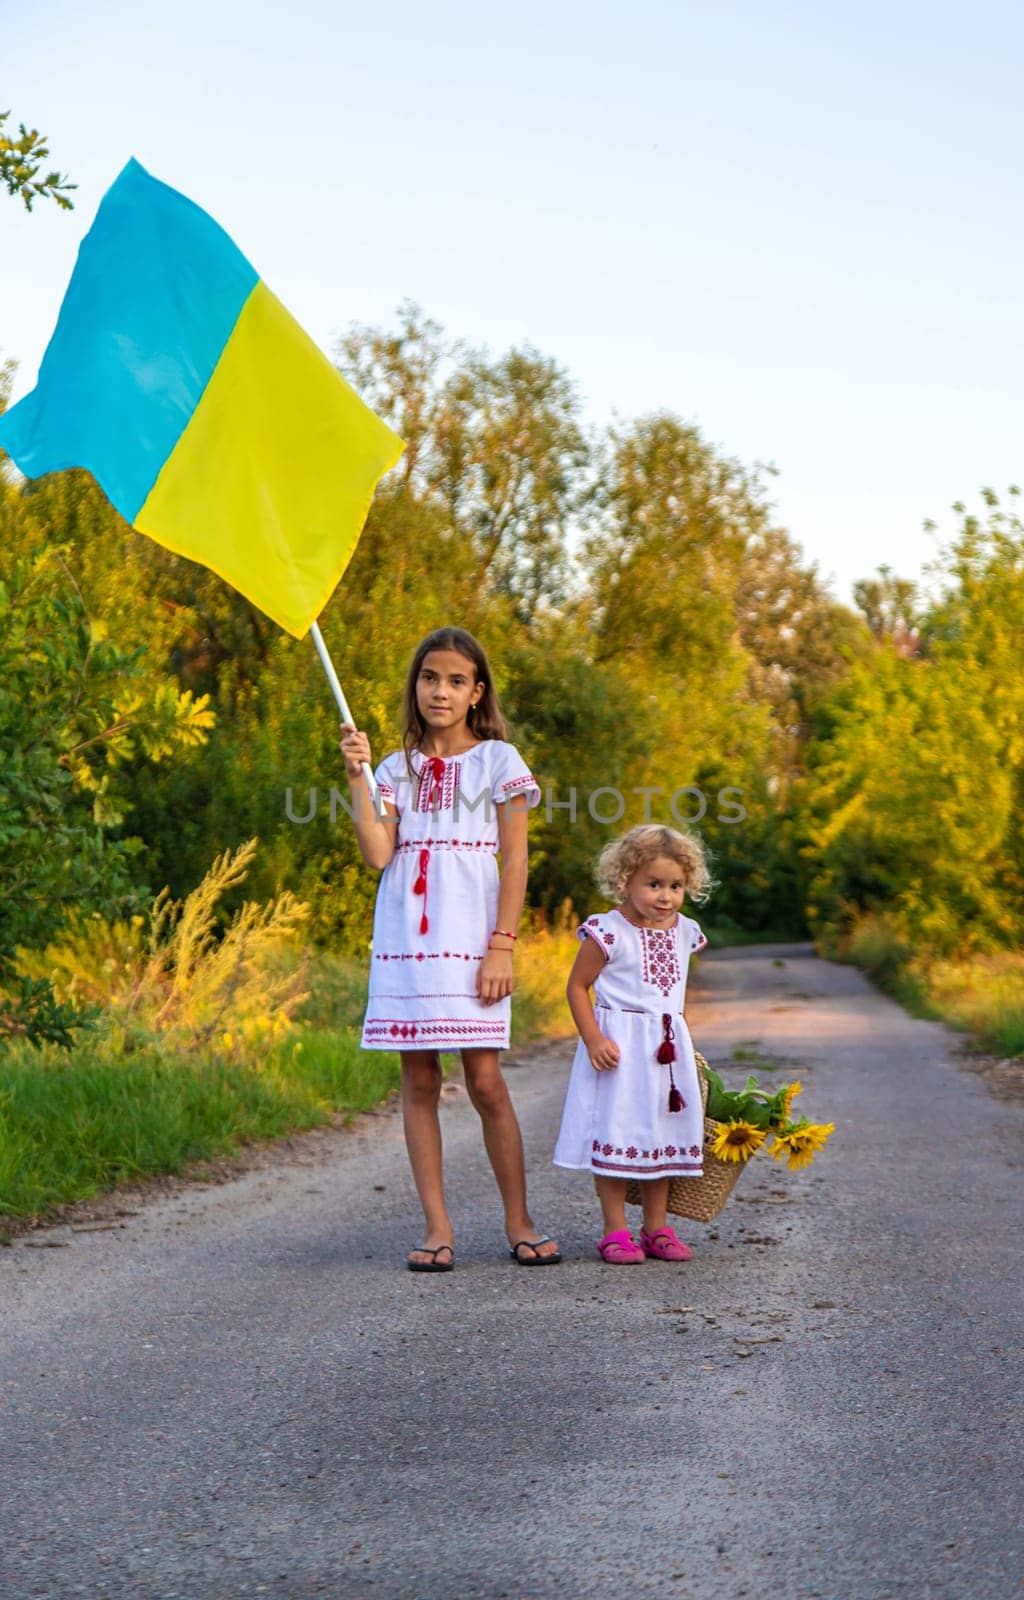 Child with the flag of Ukraine. Selective focus. by yanadjana